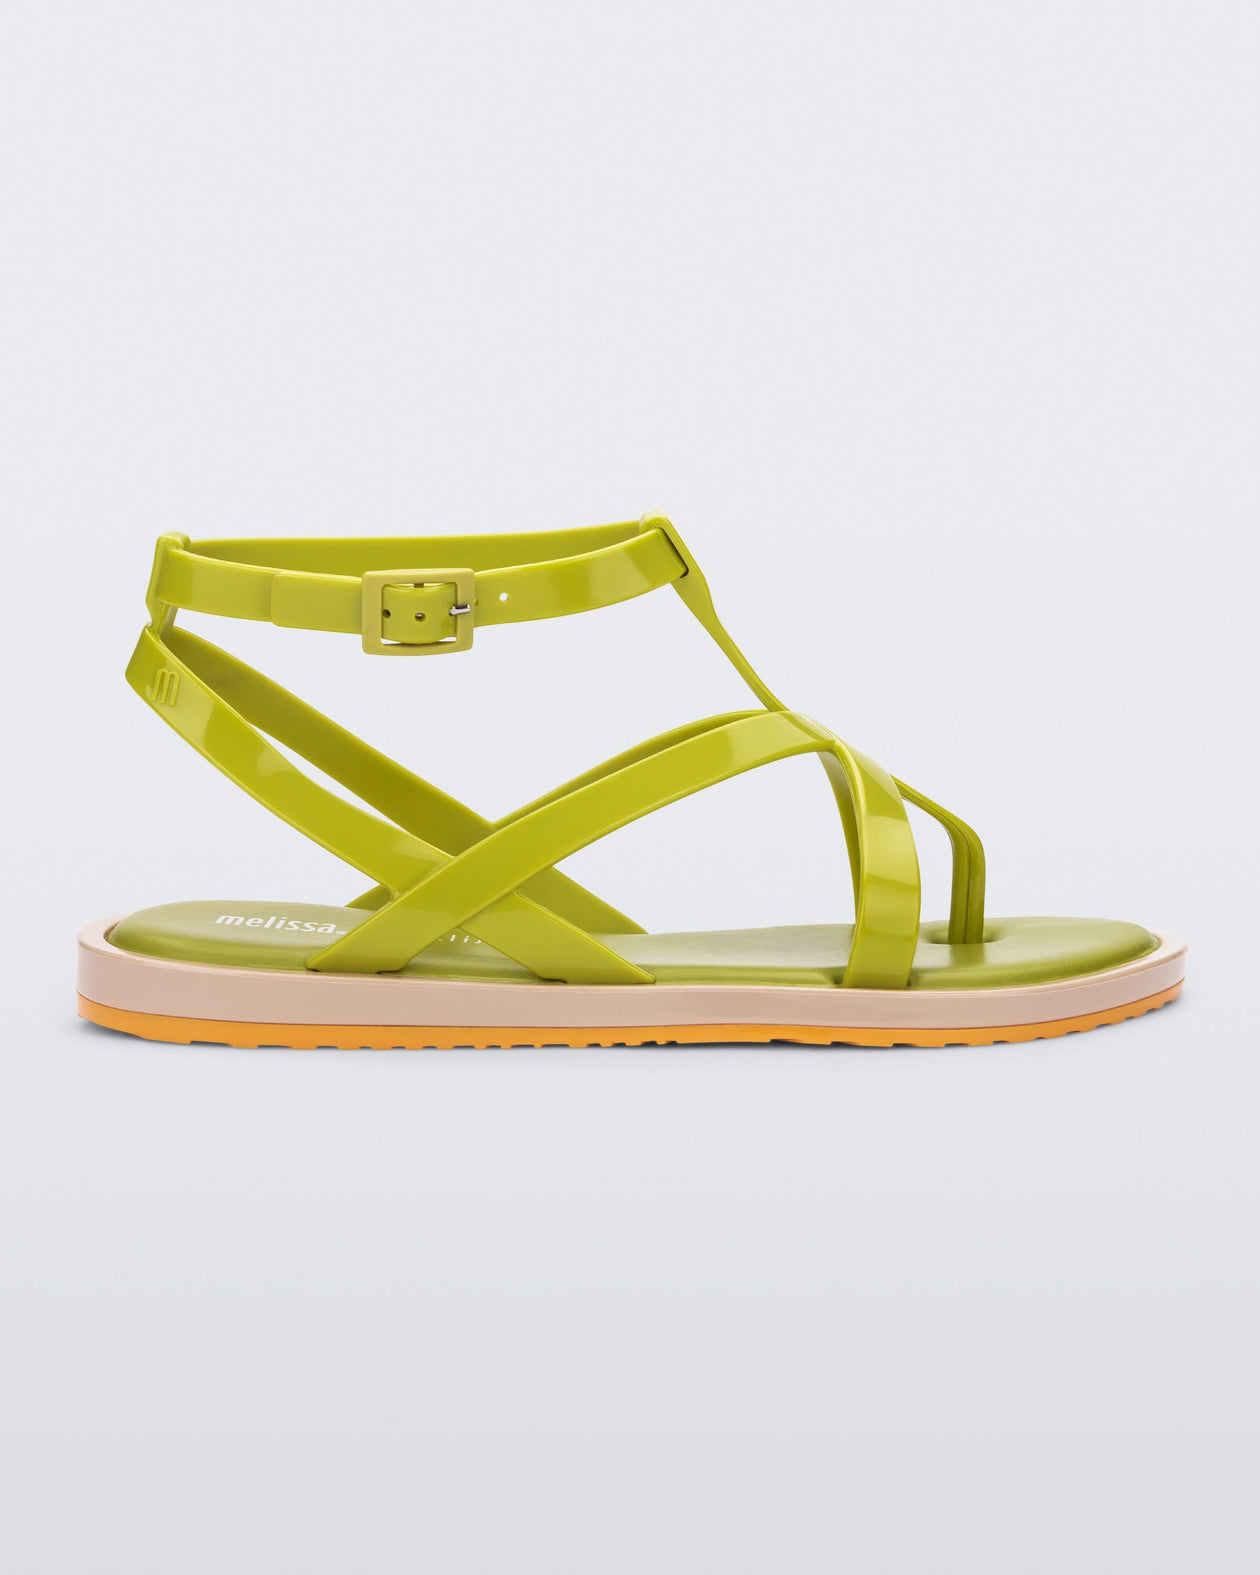 Side view of a green Melissa Cancun sandal with several straps and a beige sole.